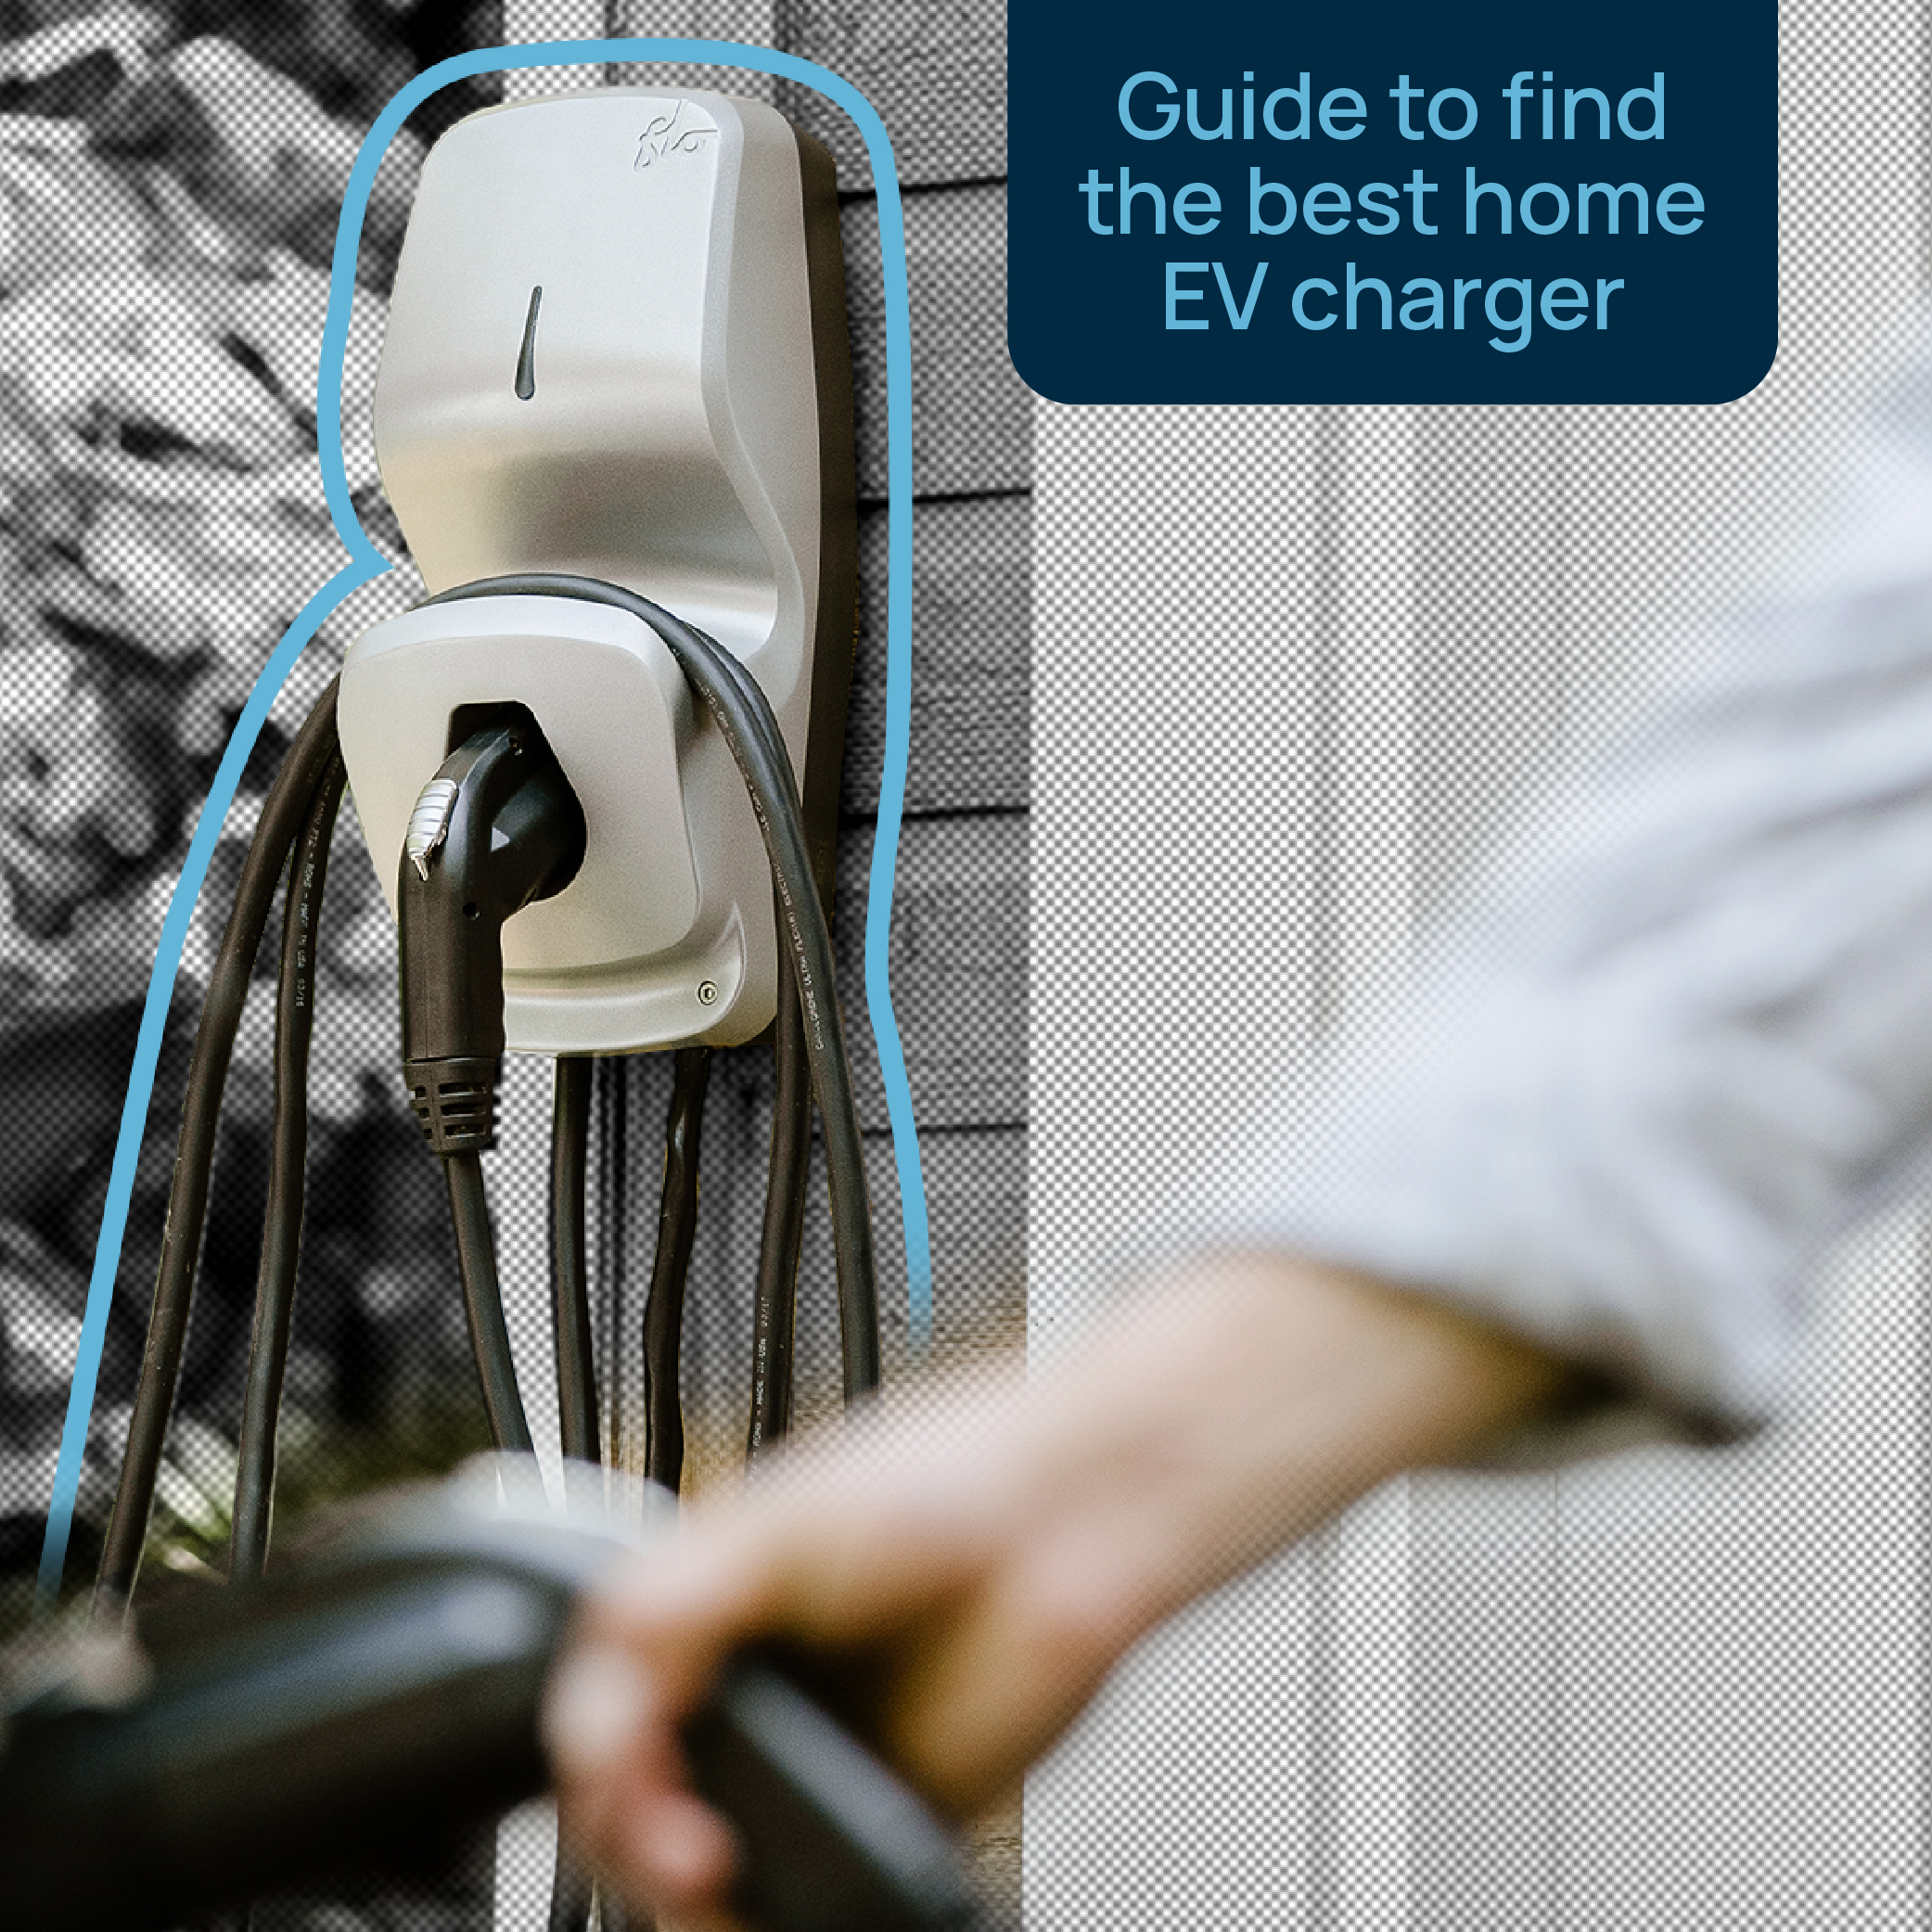 Home EV chargers: How do I choose a home EV charger?